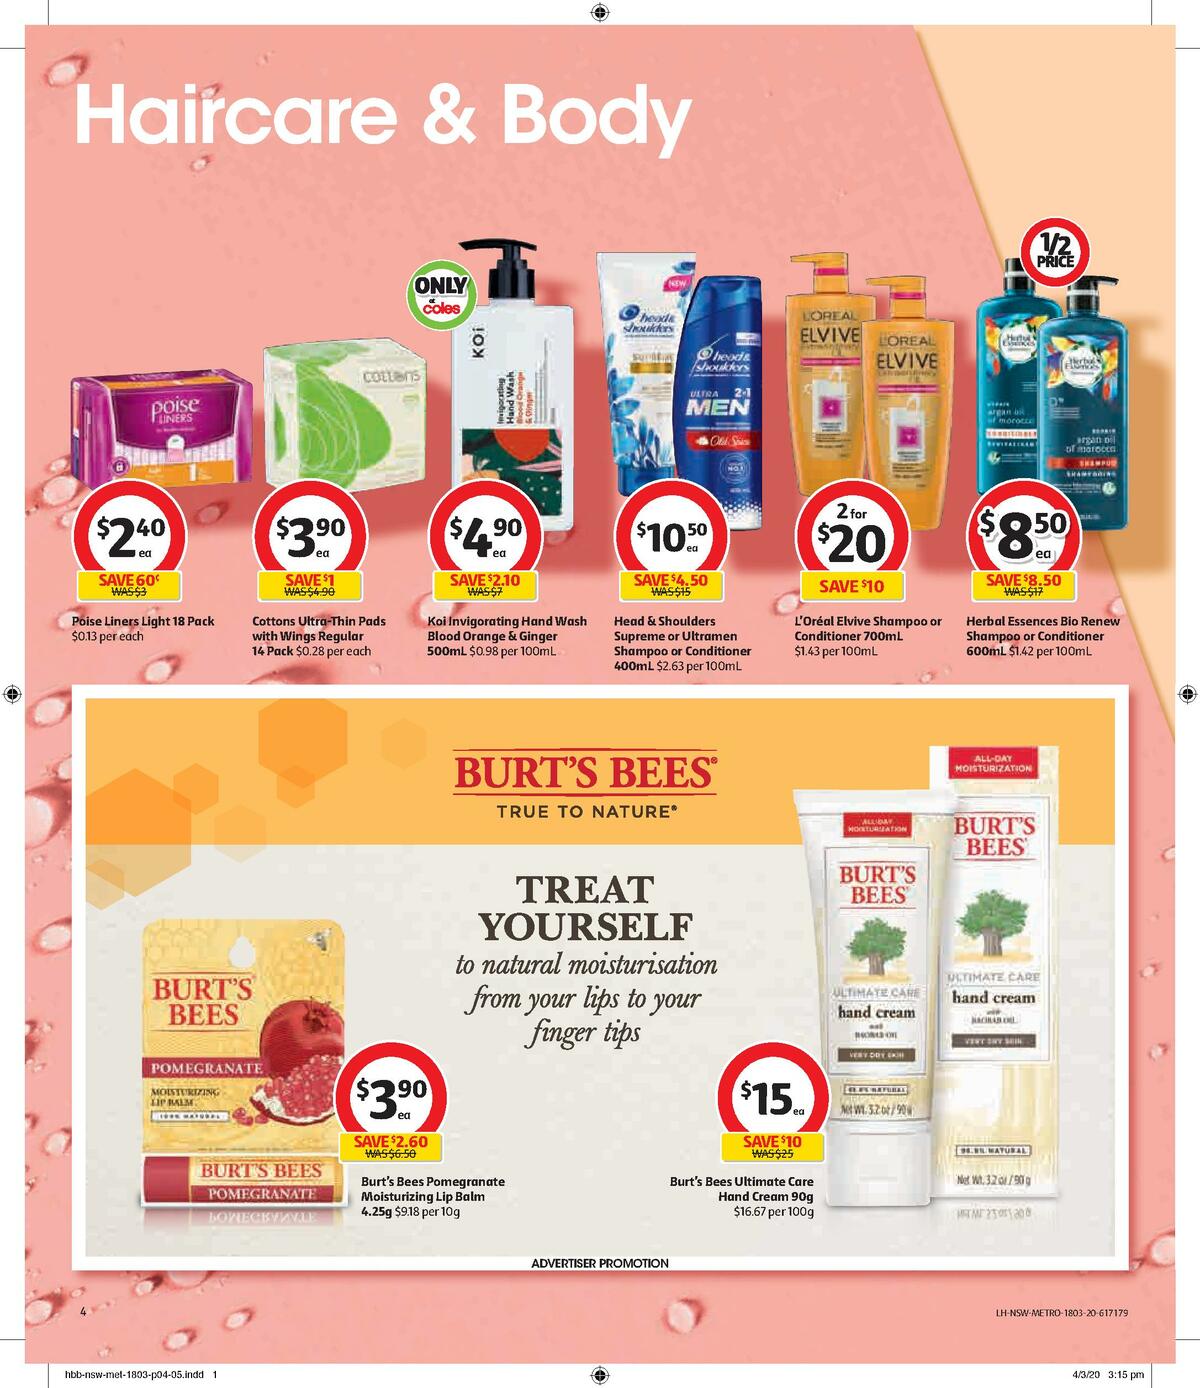 Coles Health & Beauty Catalogues from 18 March